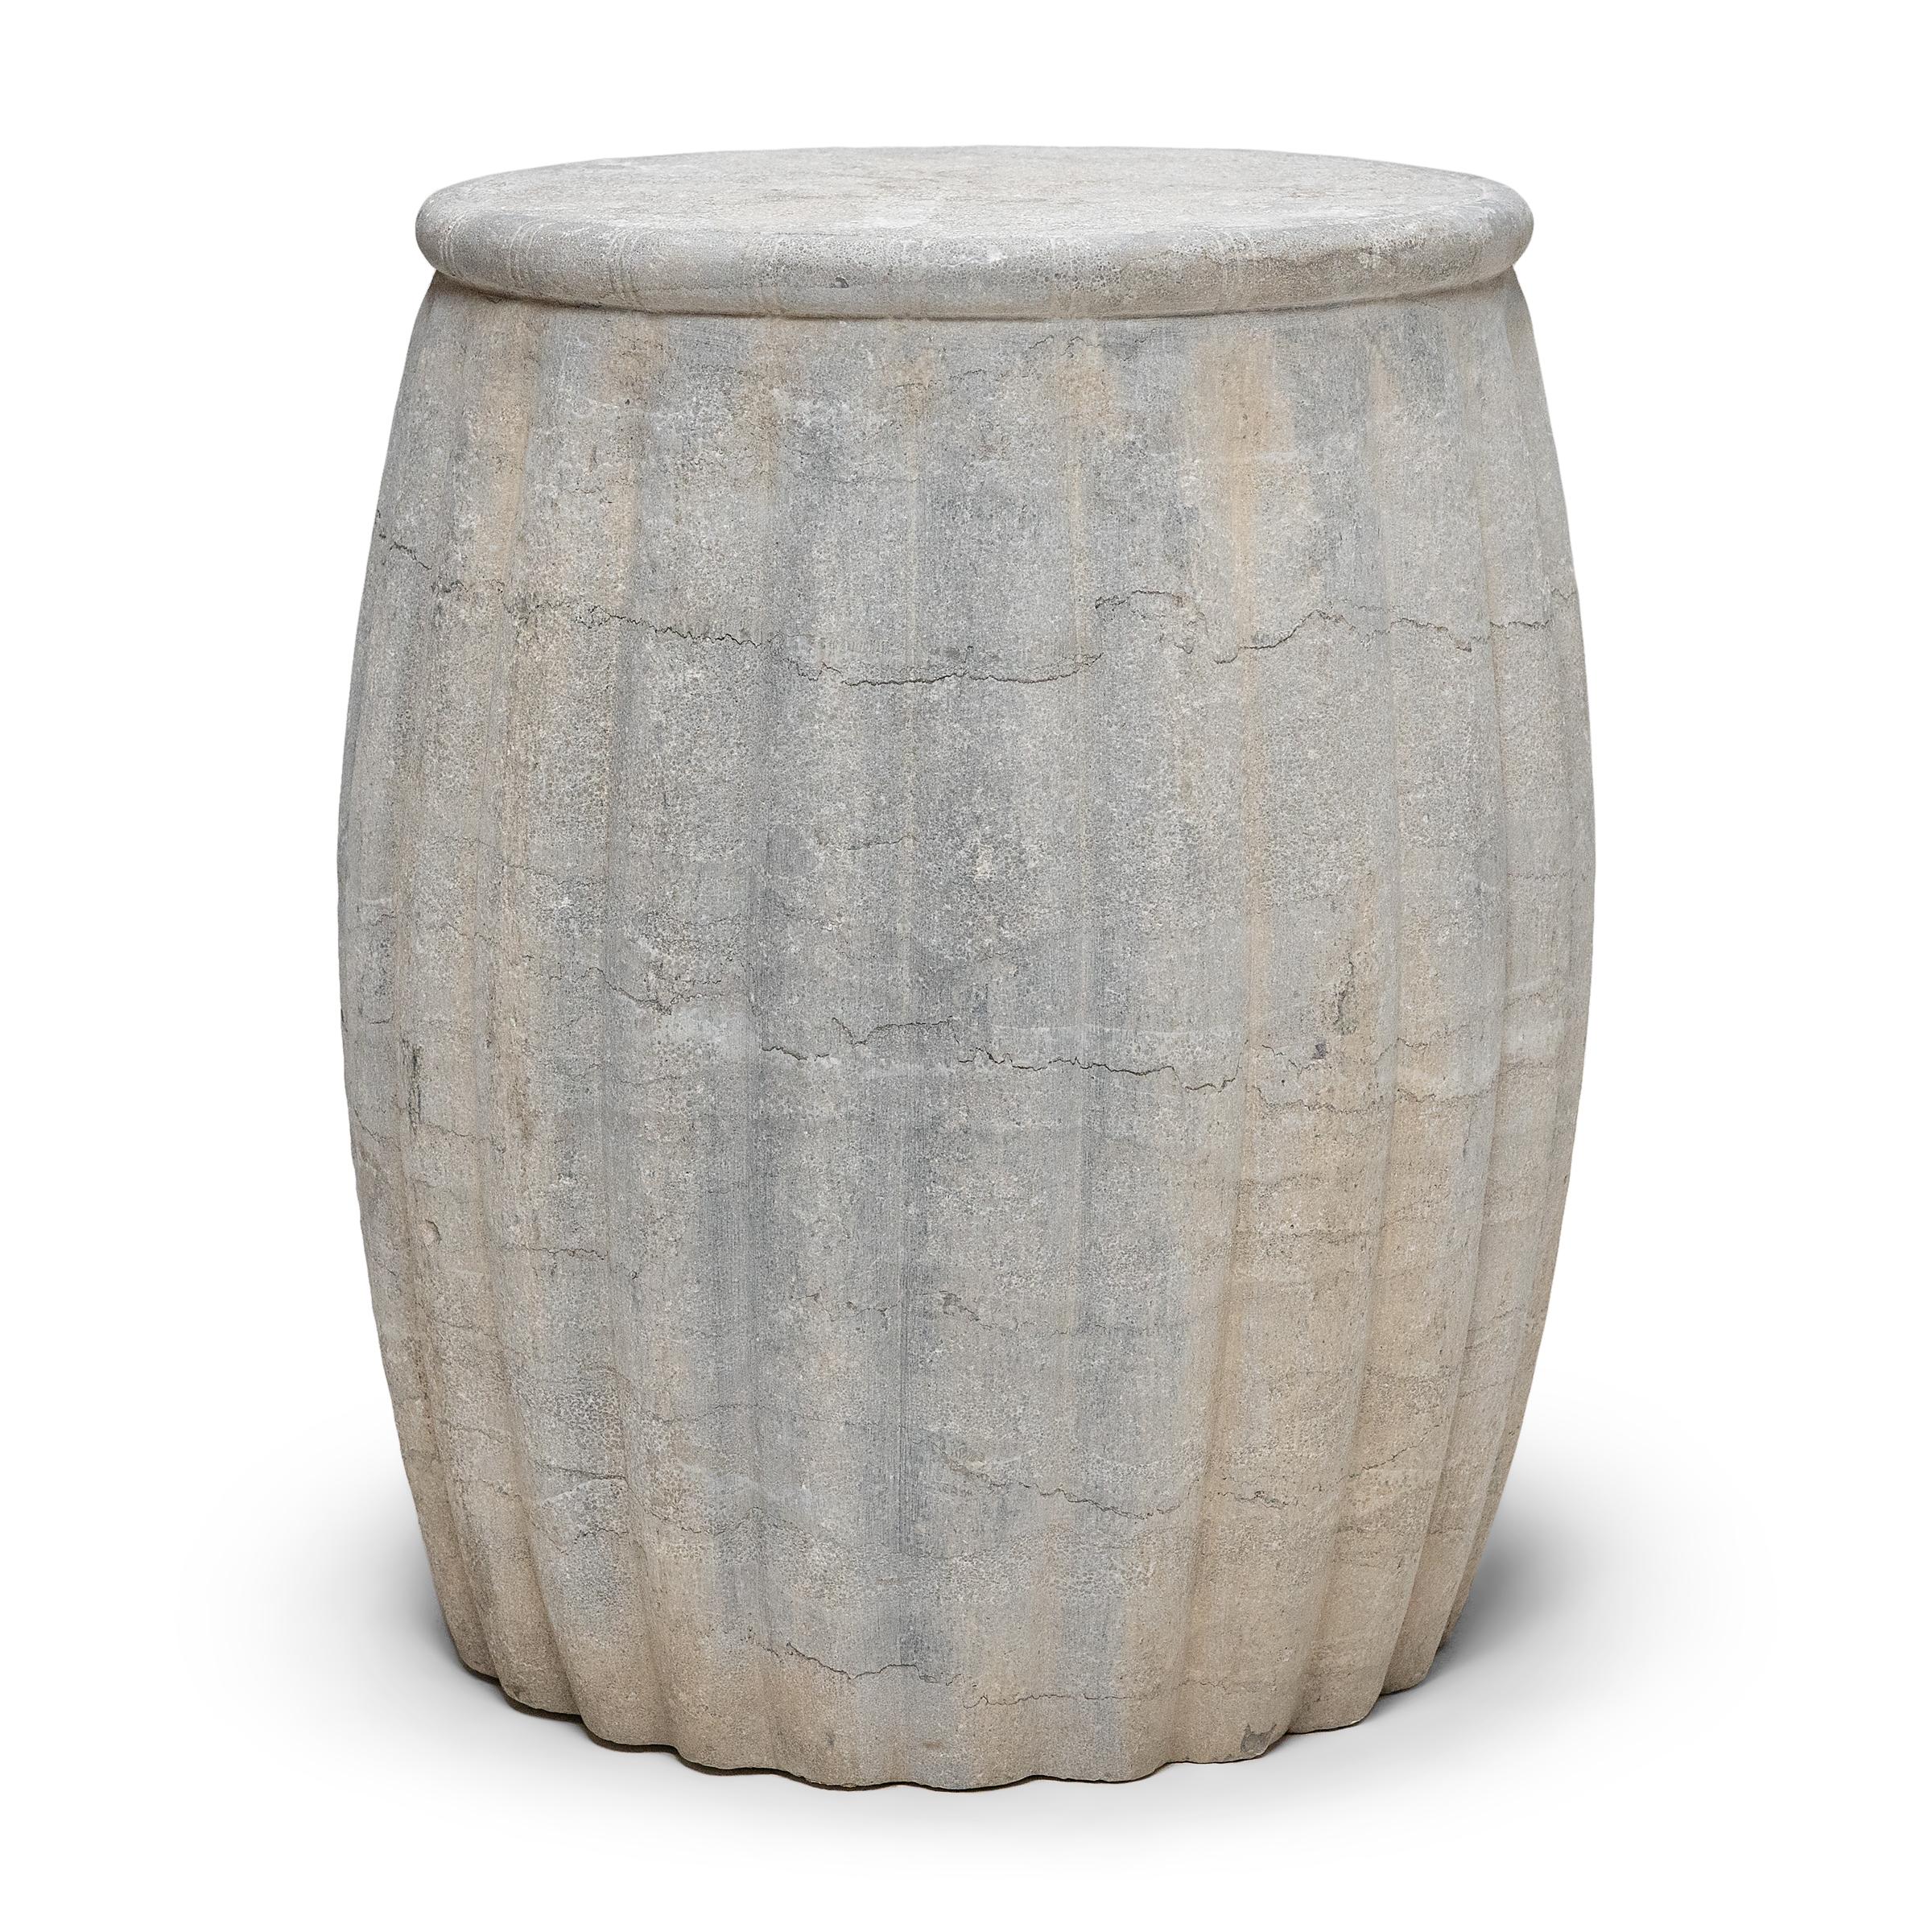 Drum-form stools such as this were traditionally used in gardens and outdoor pavilions where upper class scholars read, wrote, gathered for discussion and, in general, developed their inner sensibilities. This contemporary example is carved from